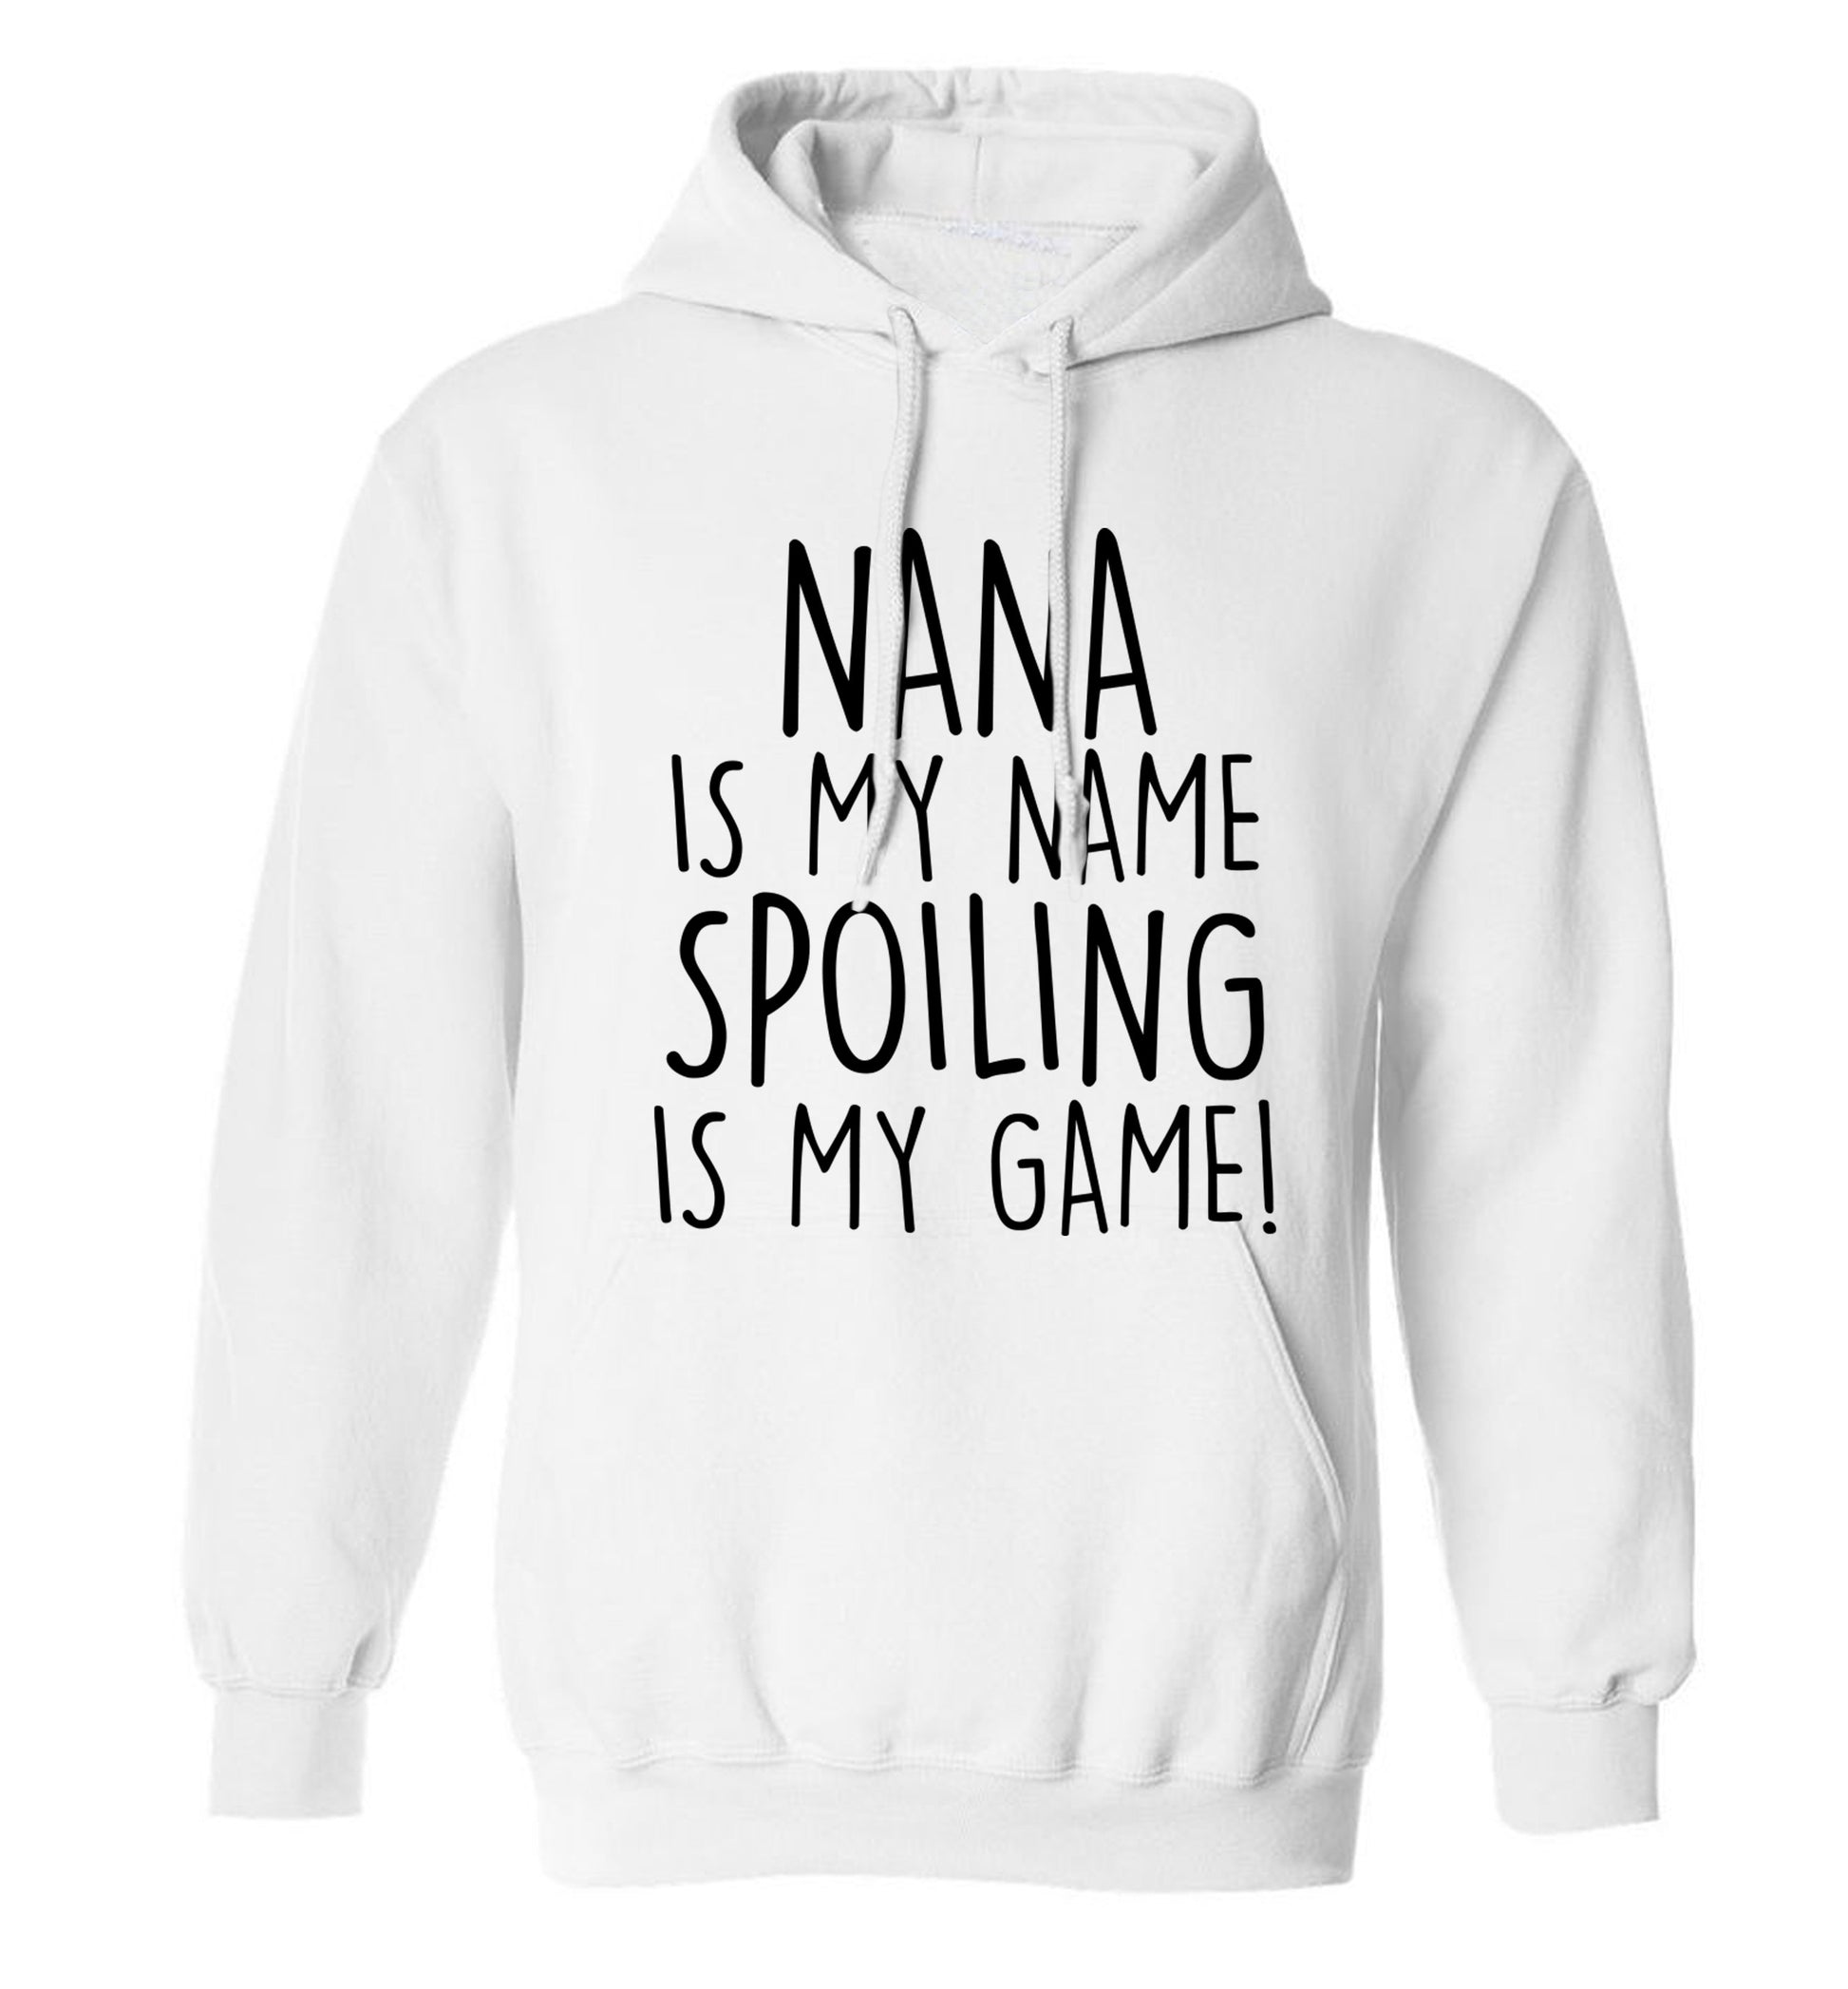 Nana is my name, spoiling is my game adults unisex white hoodie 2XL